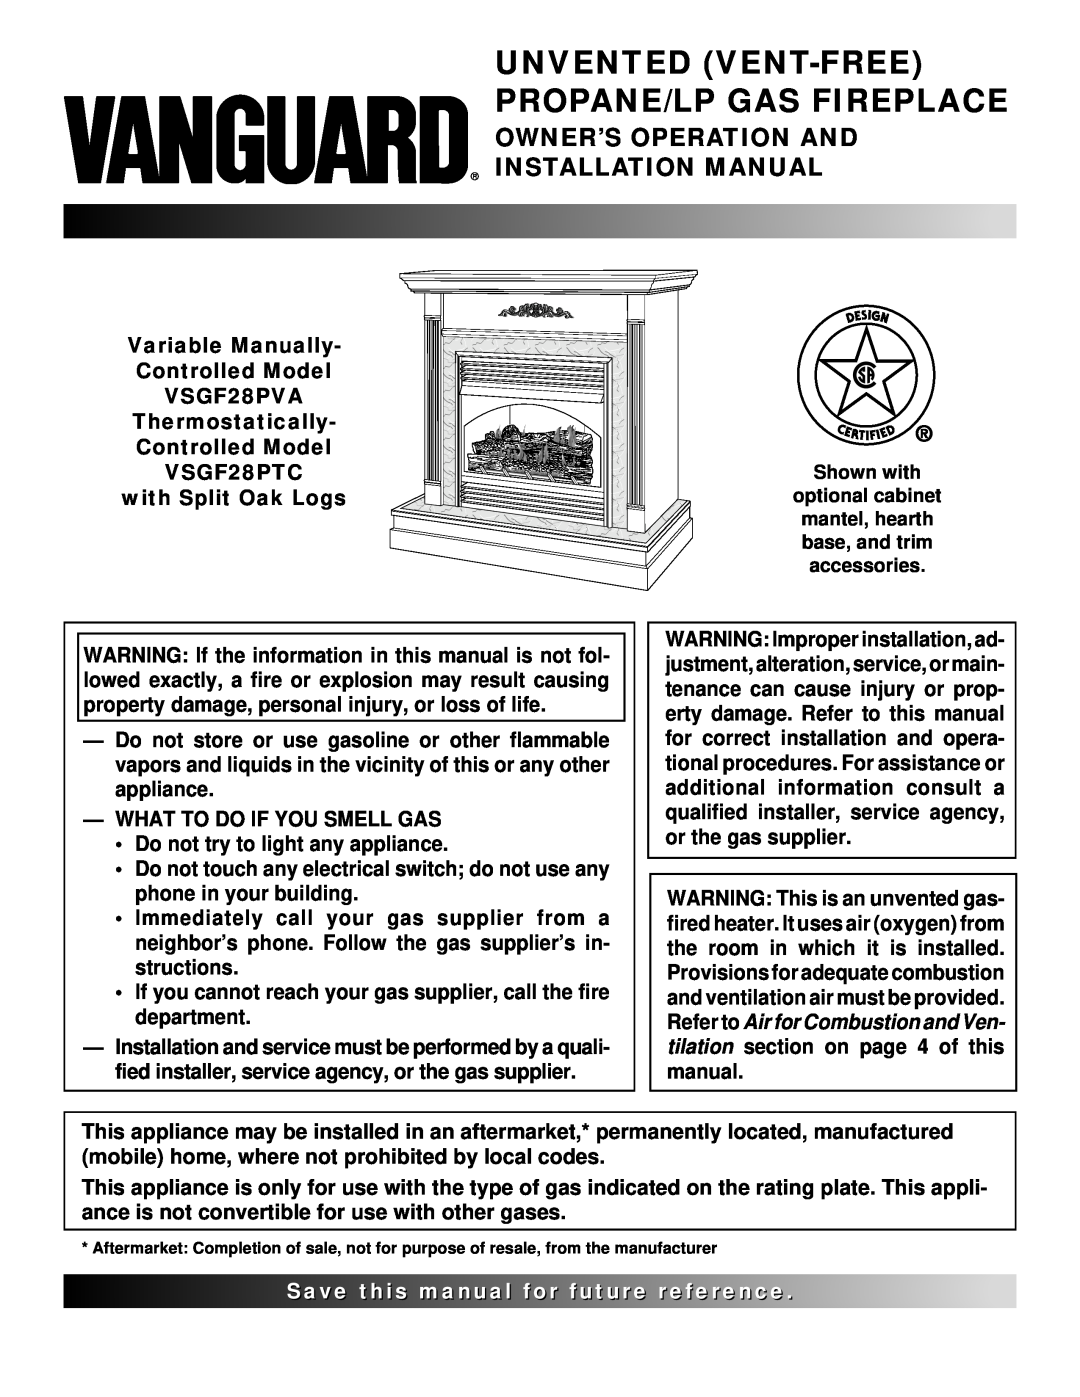 Vanguard Heating 107156-01E.pdf installation manual Unvented Vent-Free Propane/Lp Gas Fireplace, Variable Manually 